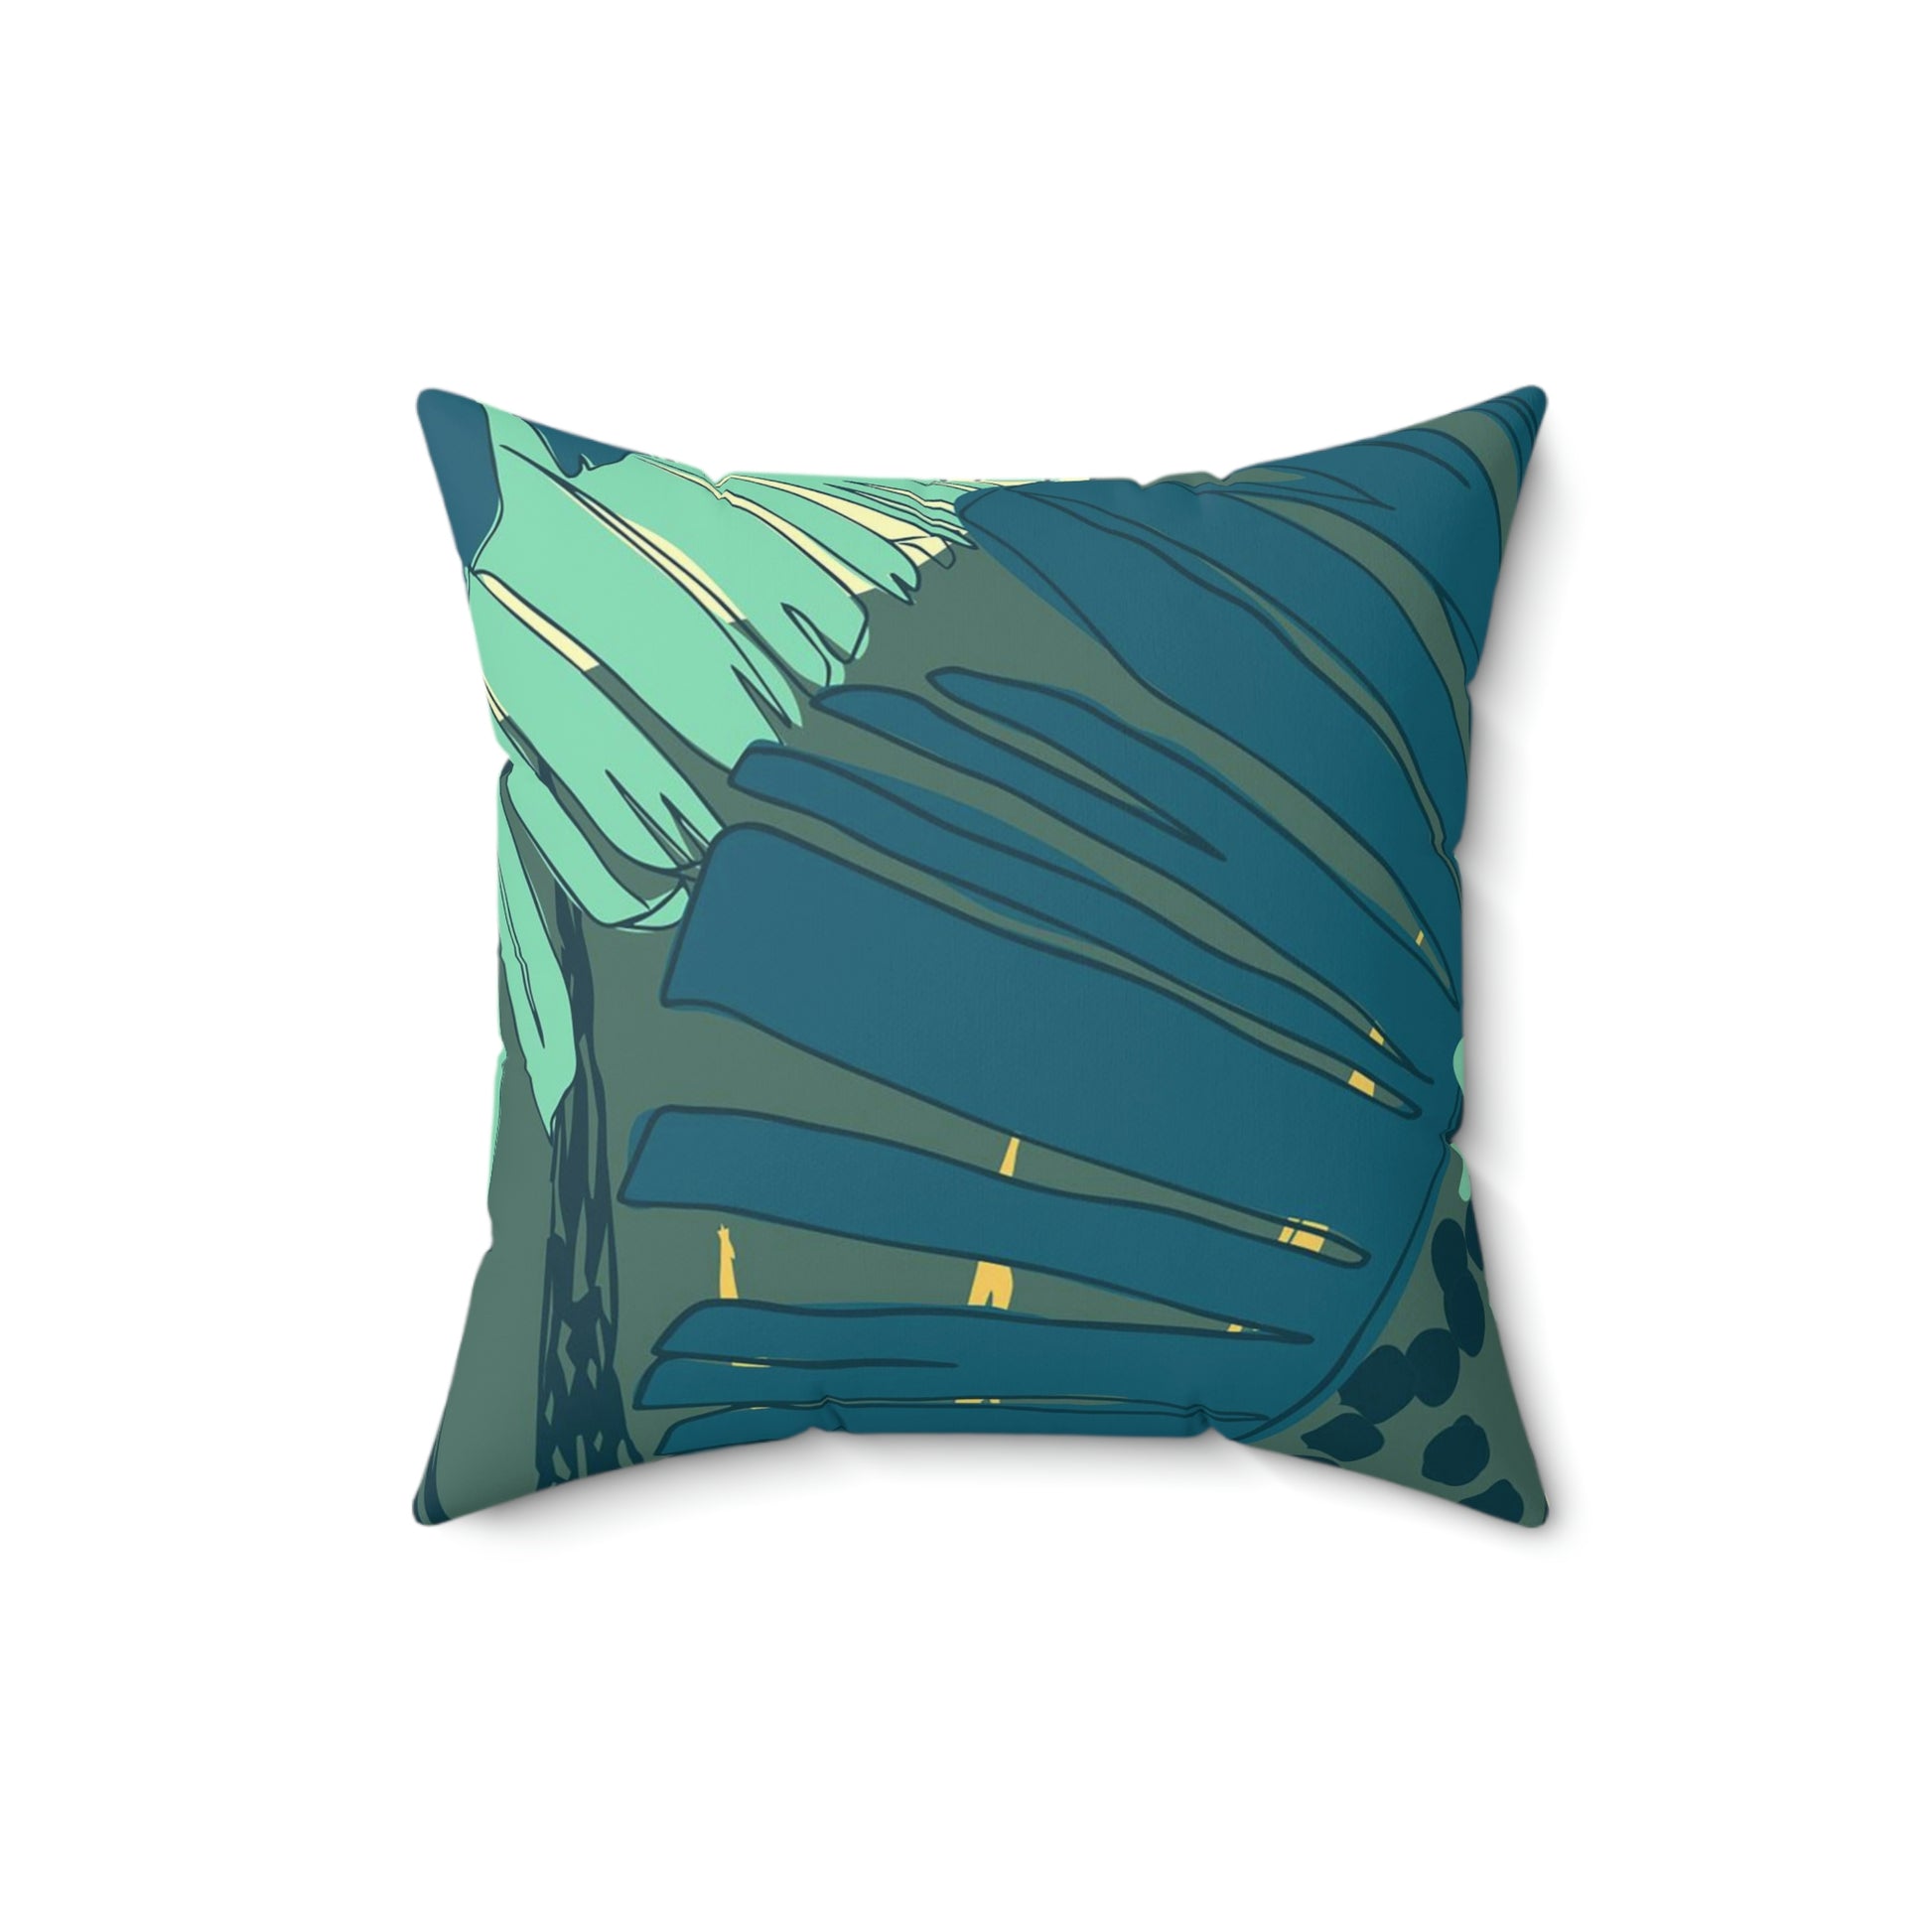 Jungle Blues Collection Throw Pillow, Tropical Print Pillow, Perfect for Tropical Vacation or Airbnb Home